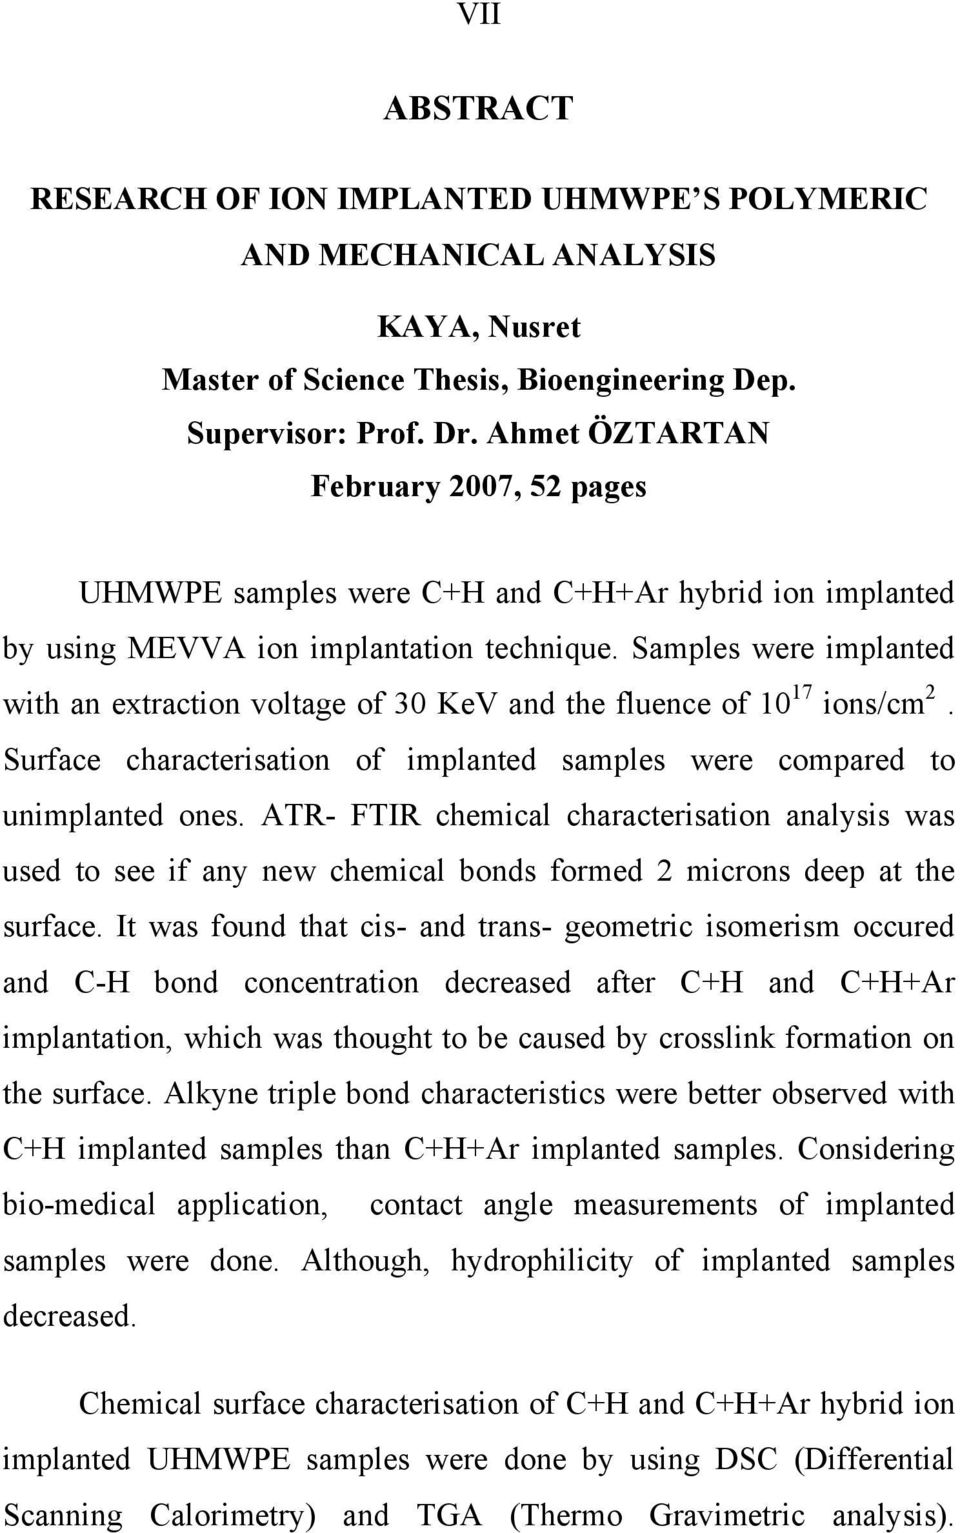 Samples were implanted with an extraction voltage of 30 KeV and the fluence of 10 17 ions/cm 2. Surface characterisation of implanted samples were compared to unimplanted ones.